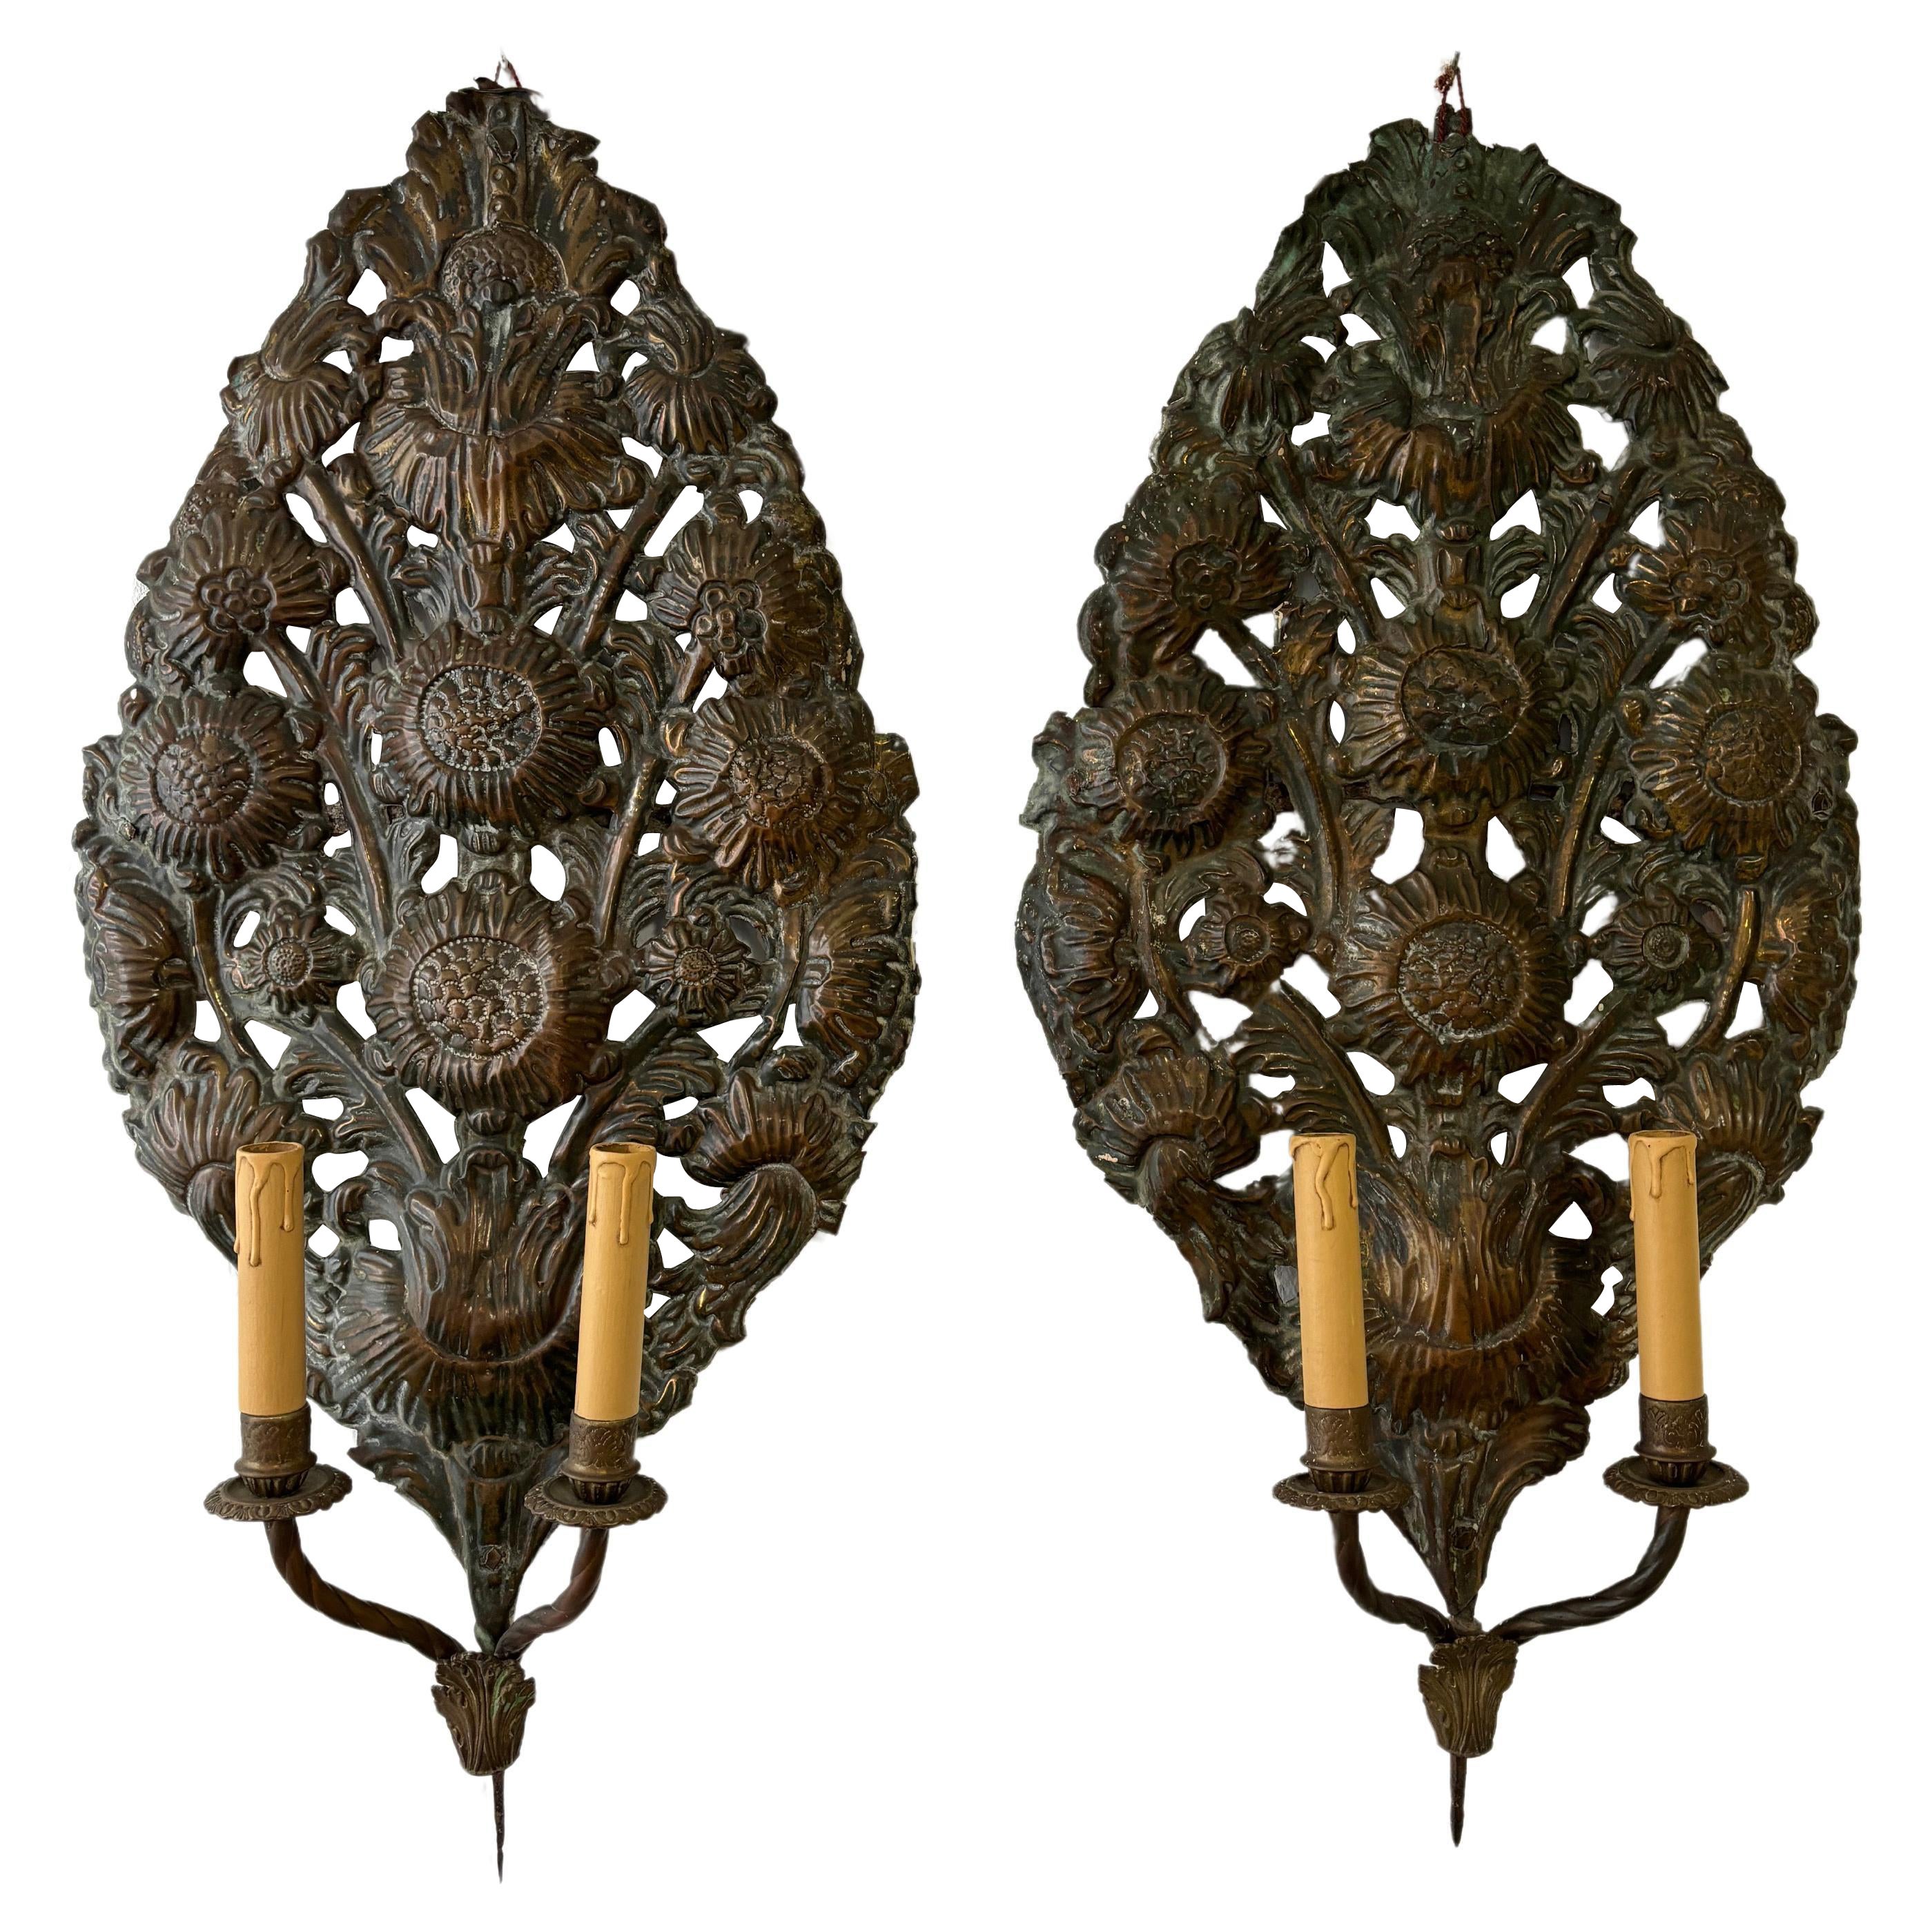 Big 18th Century Embossed Copper Floral "Palma" Church Sconces For Sale